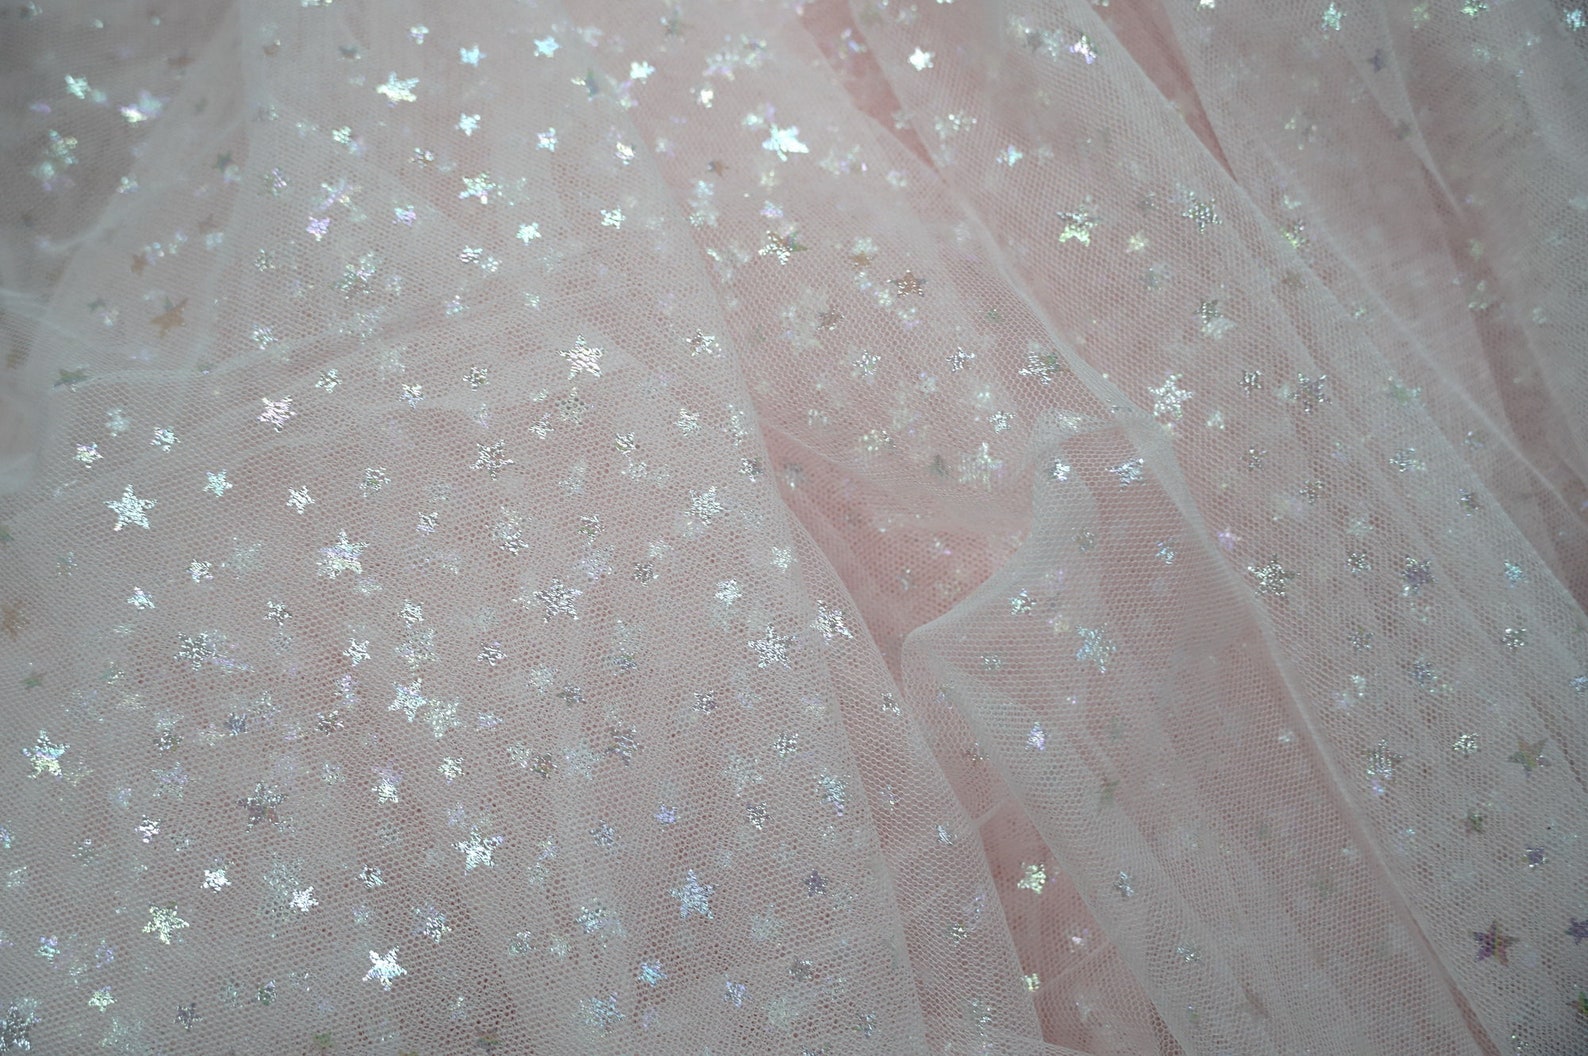 Small Star Lace Fabric Print Ombre Star Tulle Mesh Lace - Etsy